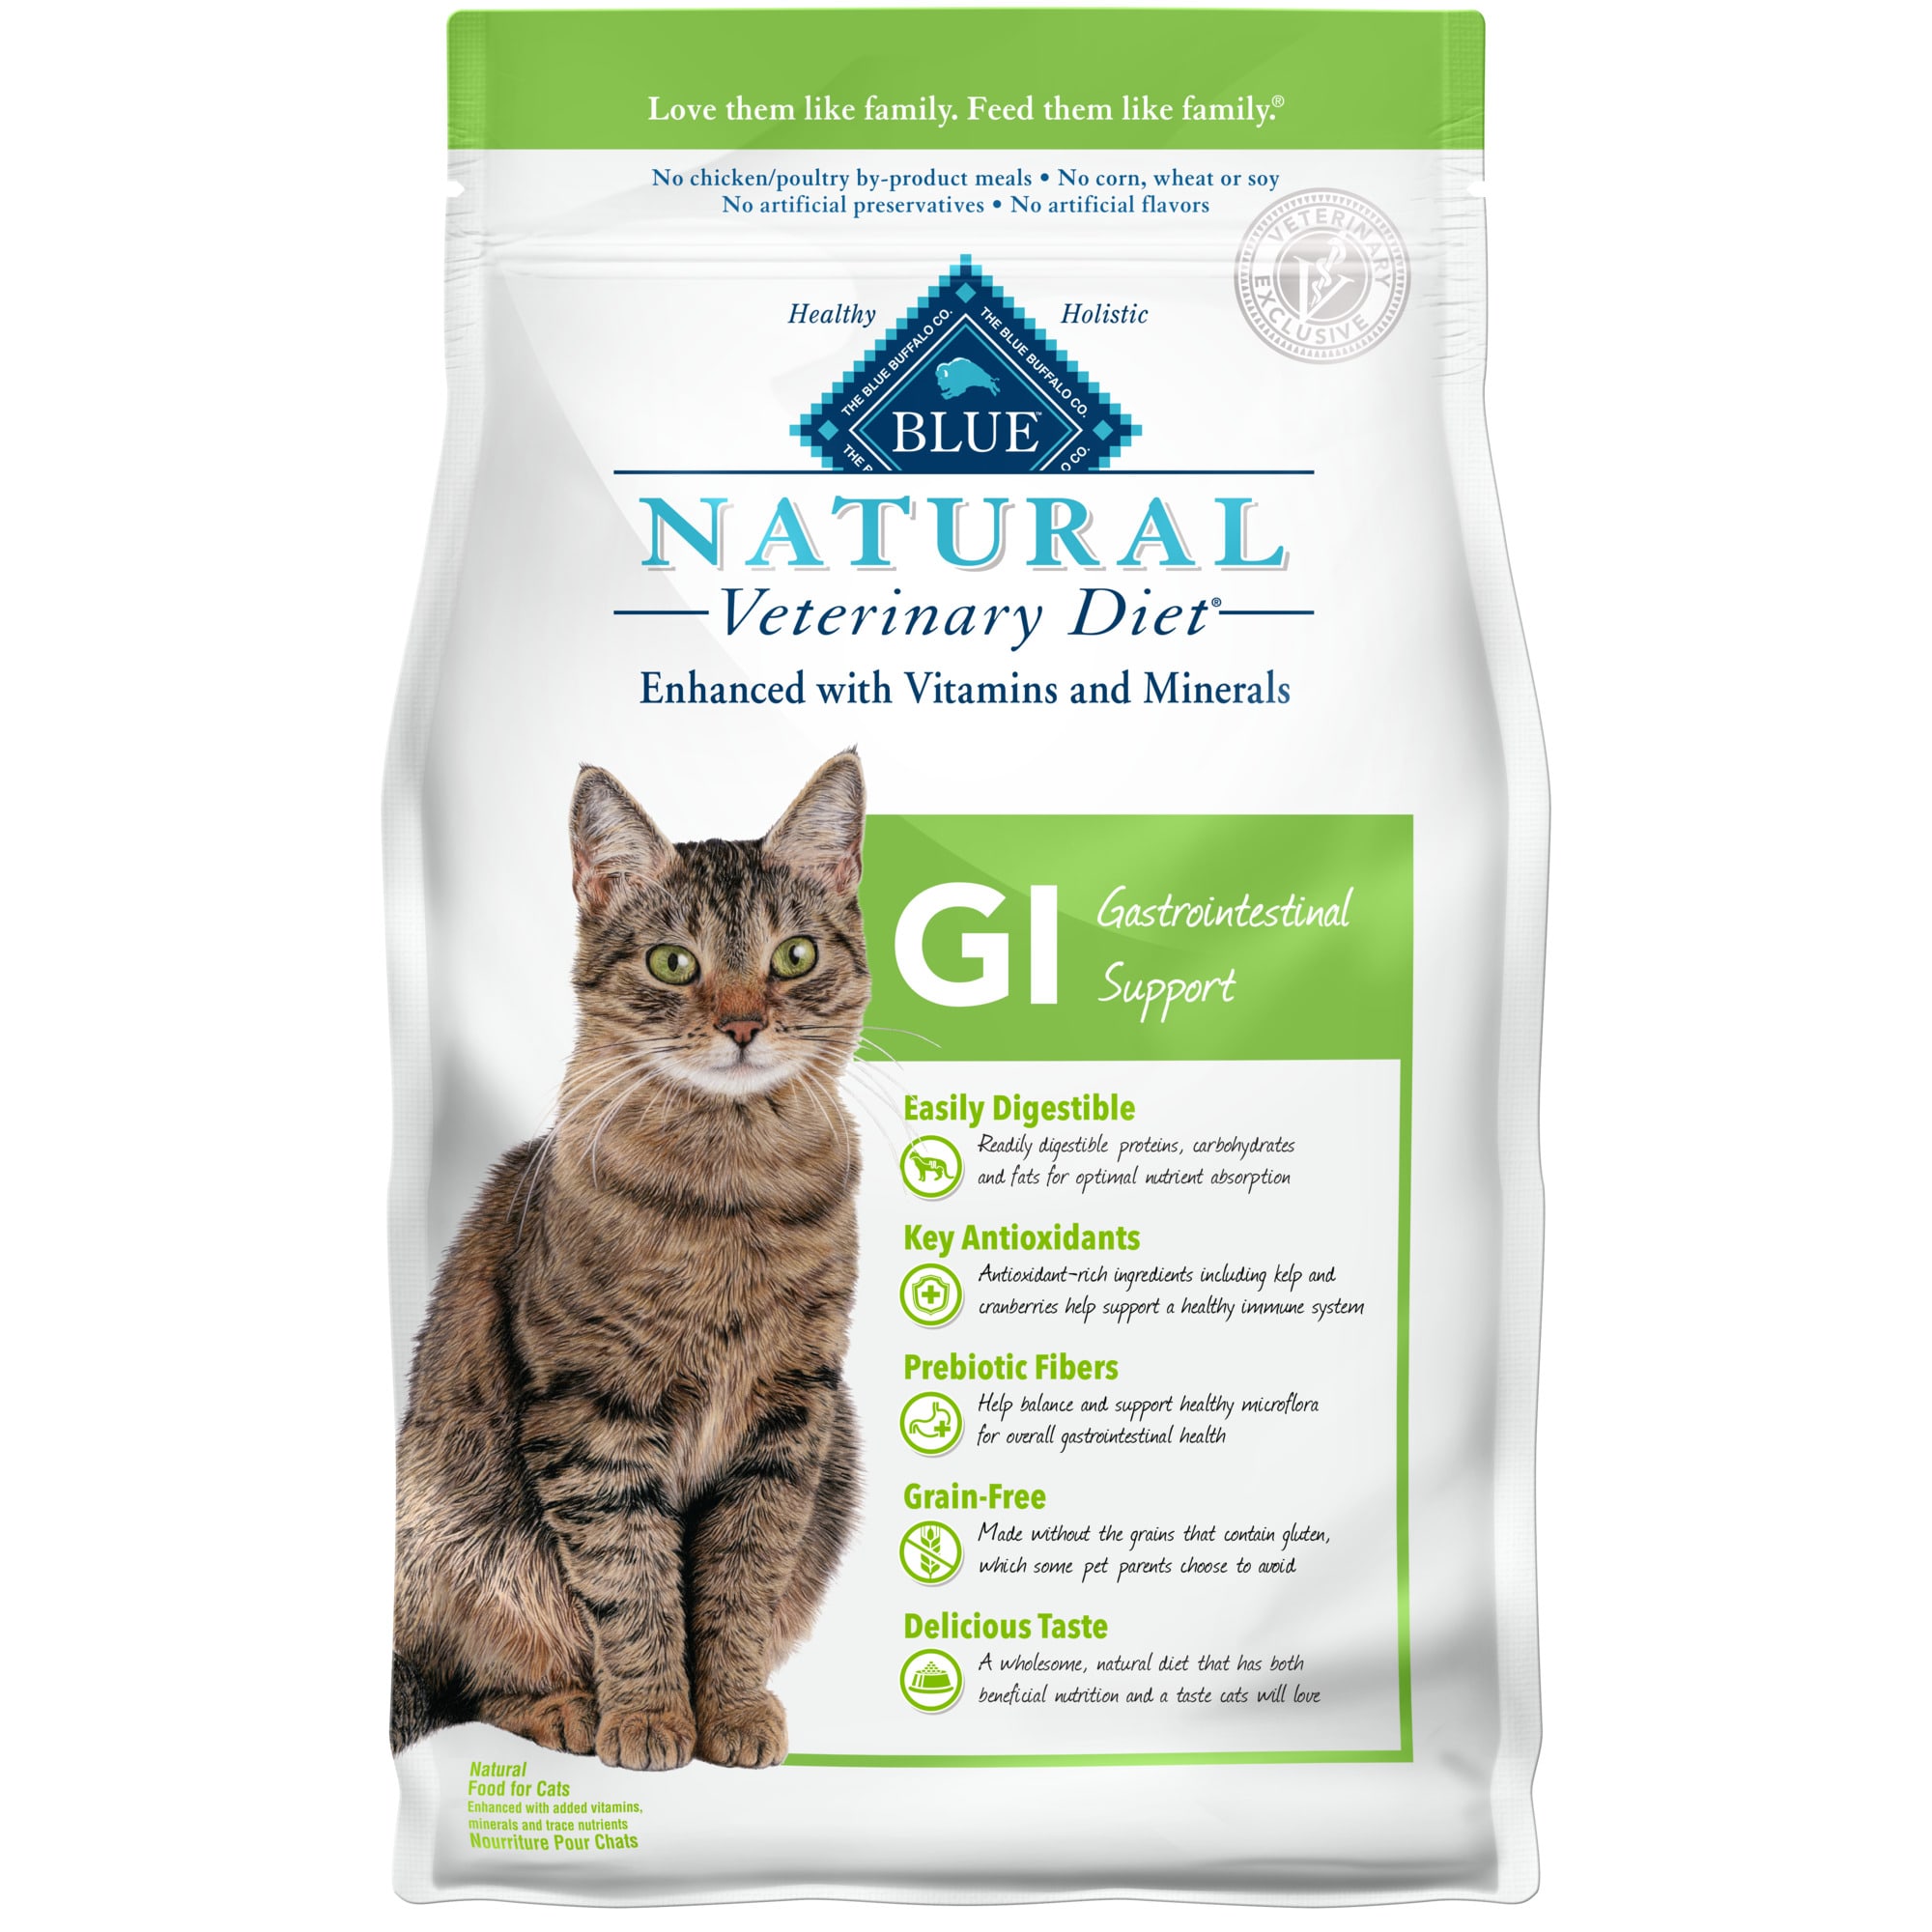 Blue Buffalo Natural Veterinary Diet GI Gastrointestinal Support Dry